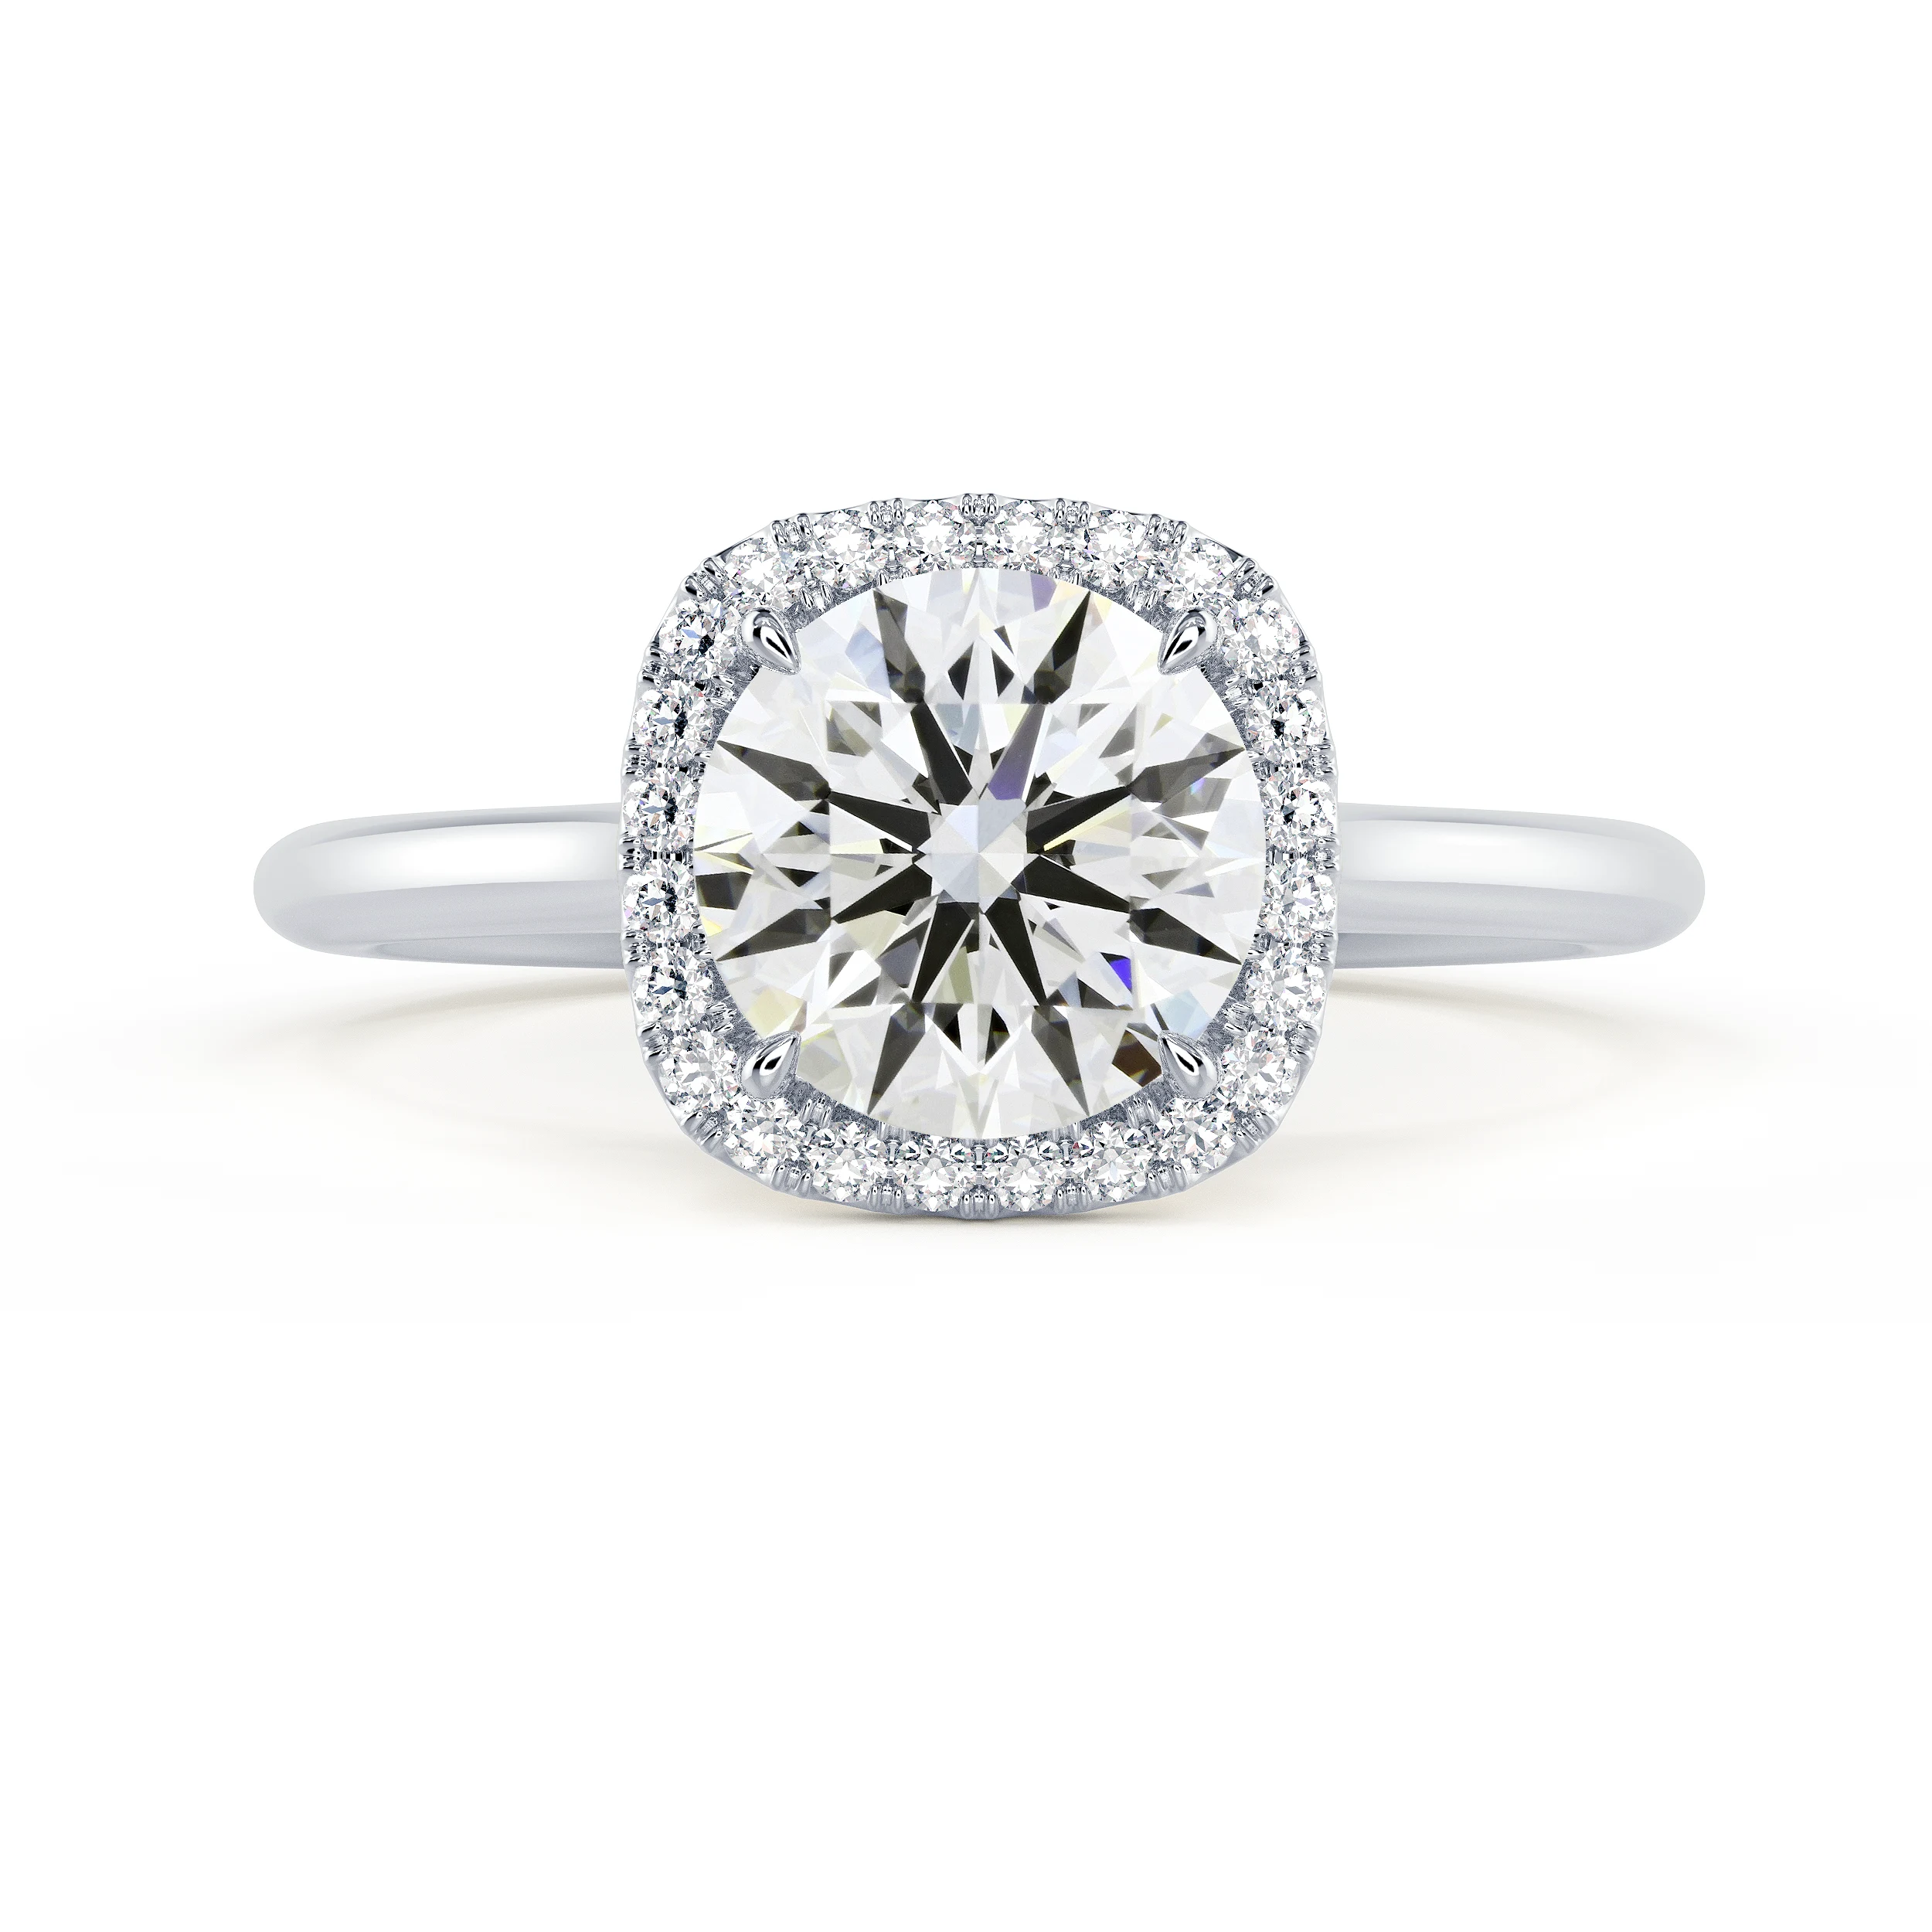 High Quality Diamonds set in White Gold Round Single Halo Setting (Main View)